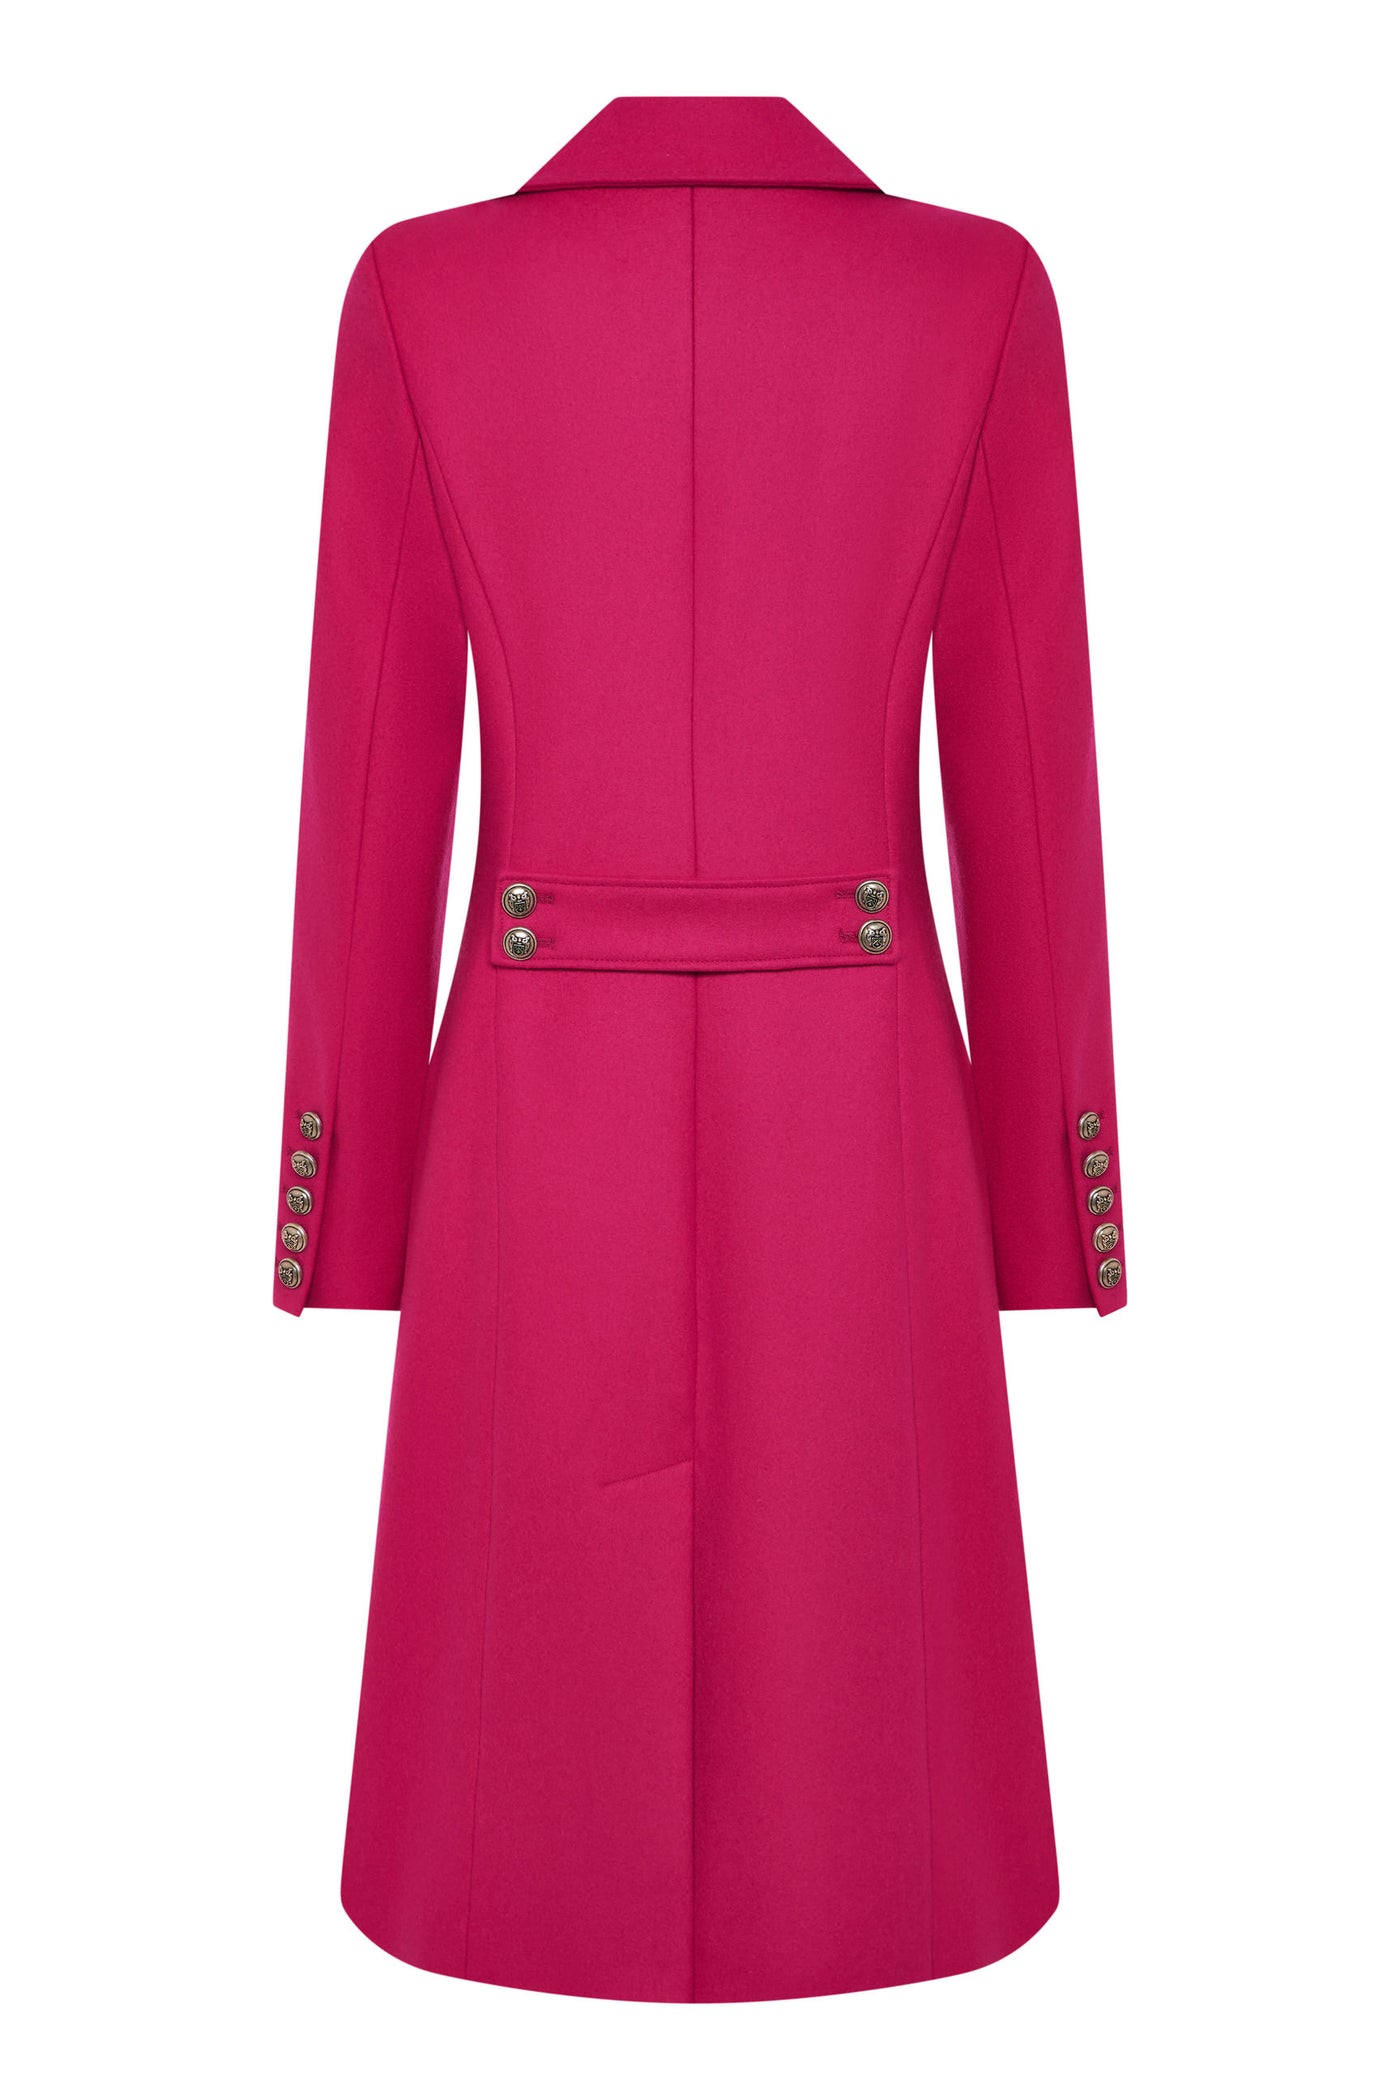 York - LIMITED EDITION Pink Wool Coat - Double Breasted Military Style